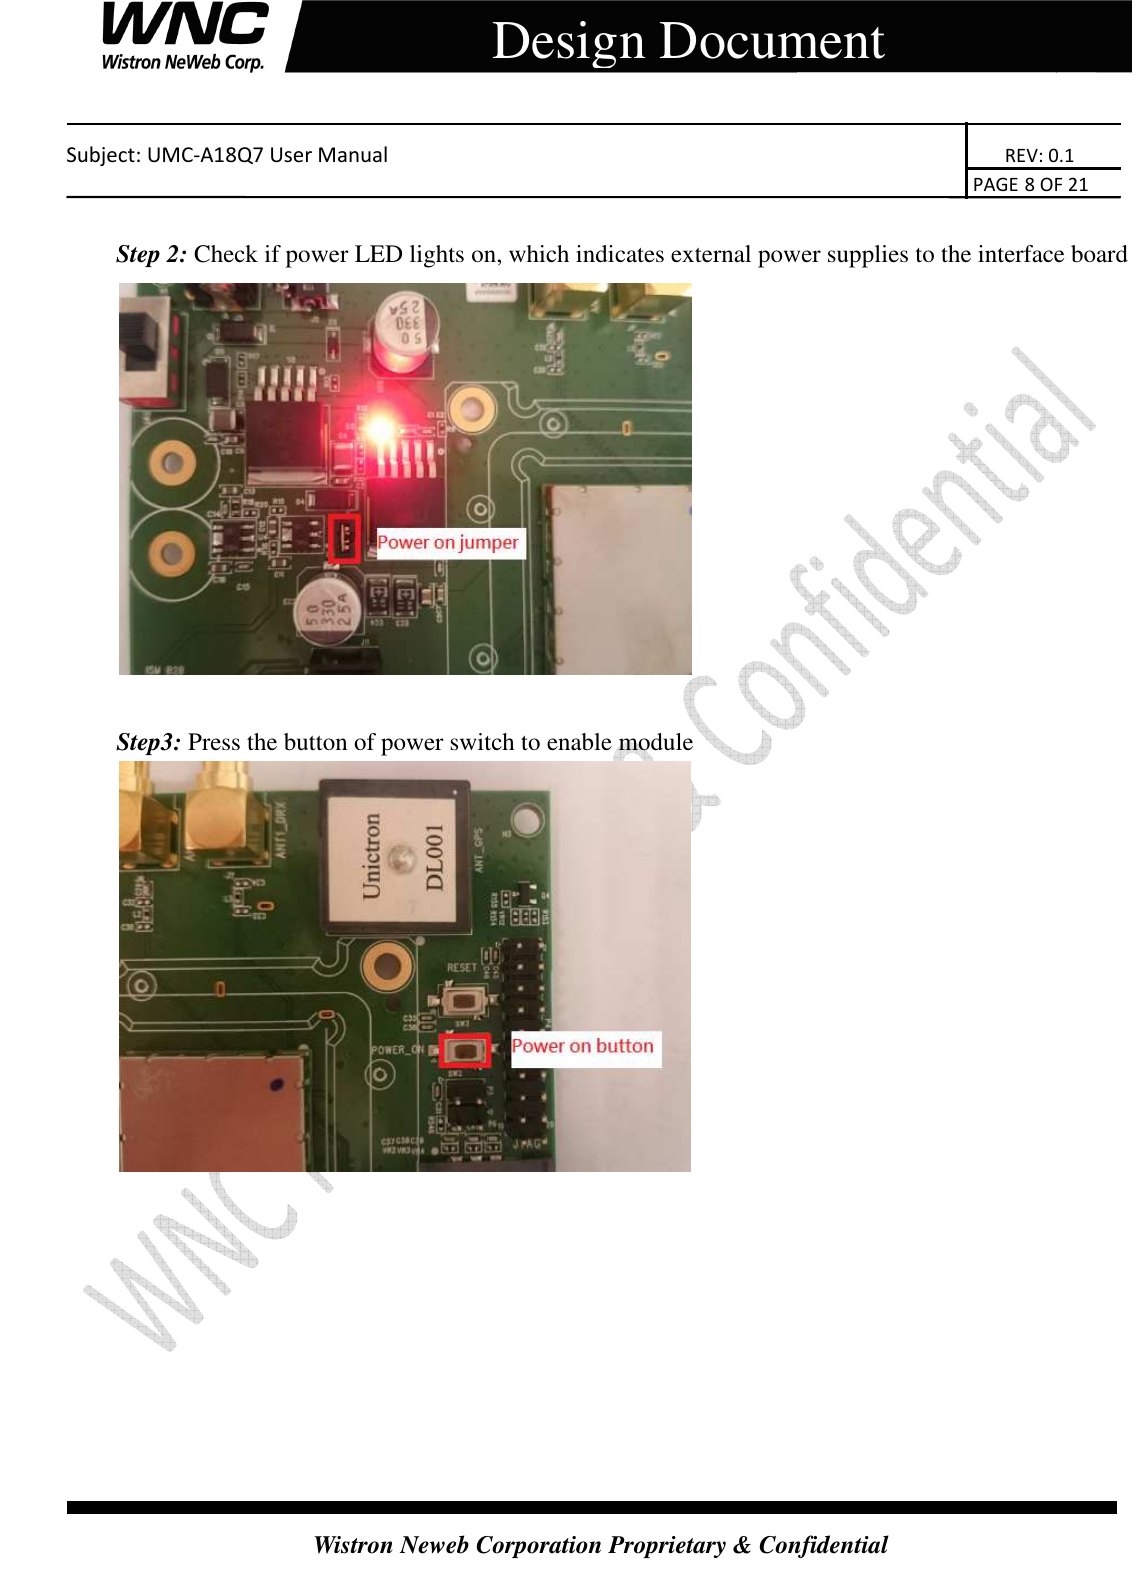    Subject: UMC-A18Q7 User Manual                                                                       REV: 0.1                                                                                                                                                                               PAGE 8 OF 21  Wistron Neweb Corporation Proprietary &amp; Confidential     Design Document  Step 2: Check if power LED lights on, which indicates external power supplies to the interface board   Step3: Press the button of power switch to enable module        